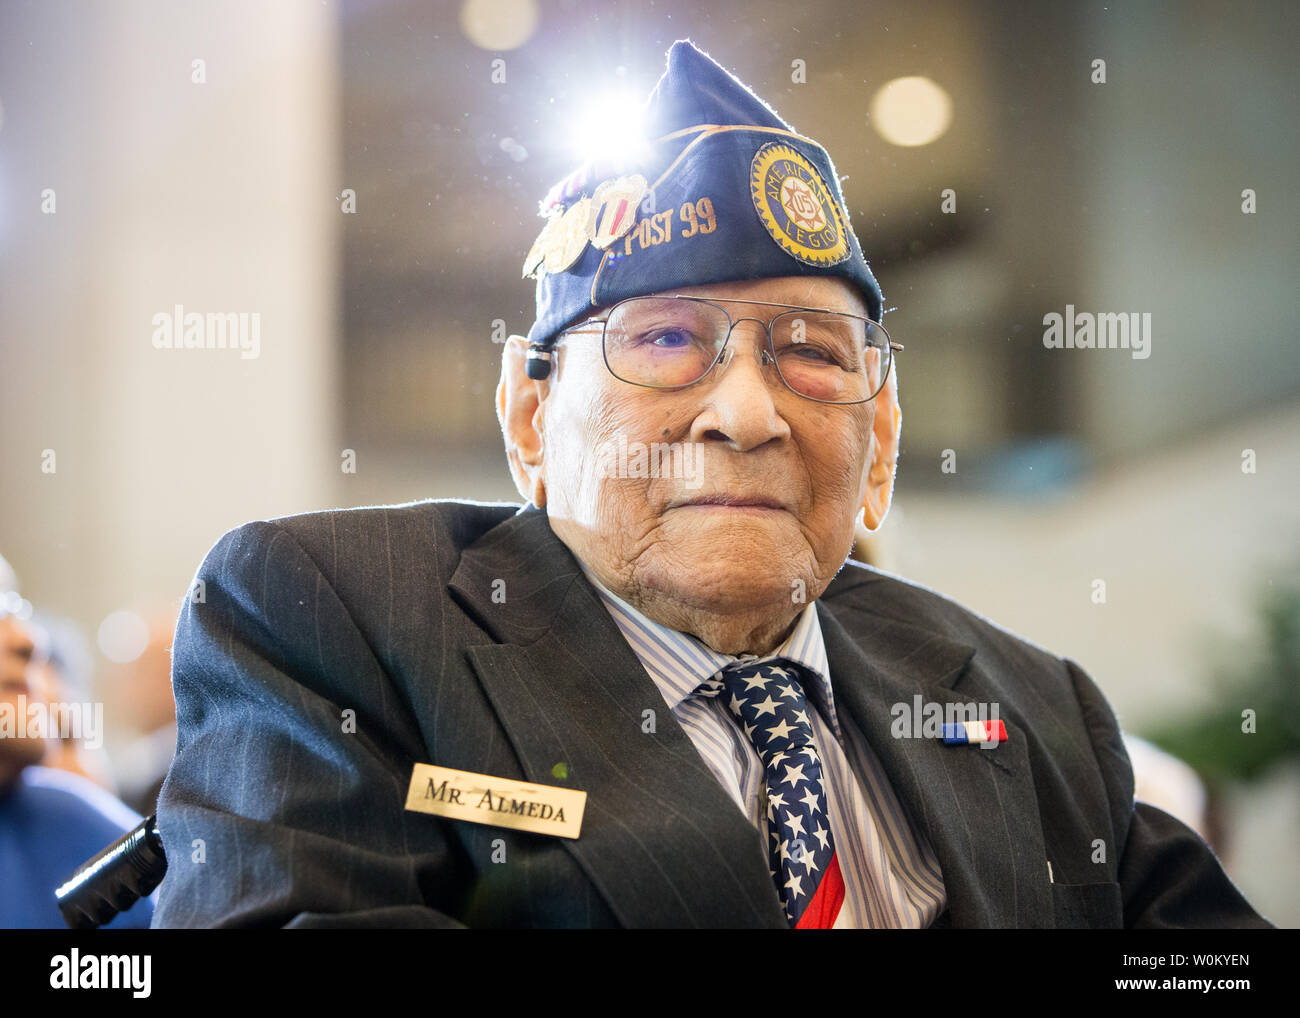 Celestino Almeda, a Filipino World War II veteran, sits before a Congressional Gold Medal to honor Filipino veterans of World War II for their service and sacrifice during the war during a ceremony on Capitol Hill in Washington, DC on October 25, 2017. The medal is the highest civilian award and is being presented after a lengthy struggle for recognition of the service of 260,000 Filipinos who fought for the United States over 75 years ago. Photo by Erin Schaff/UPI Stock Photo